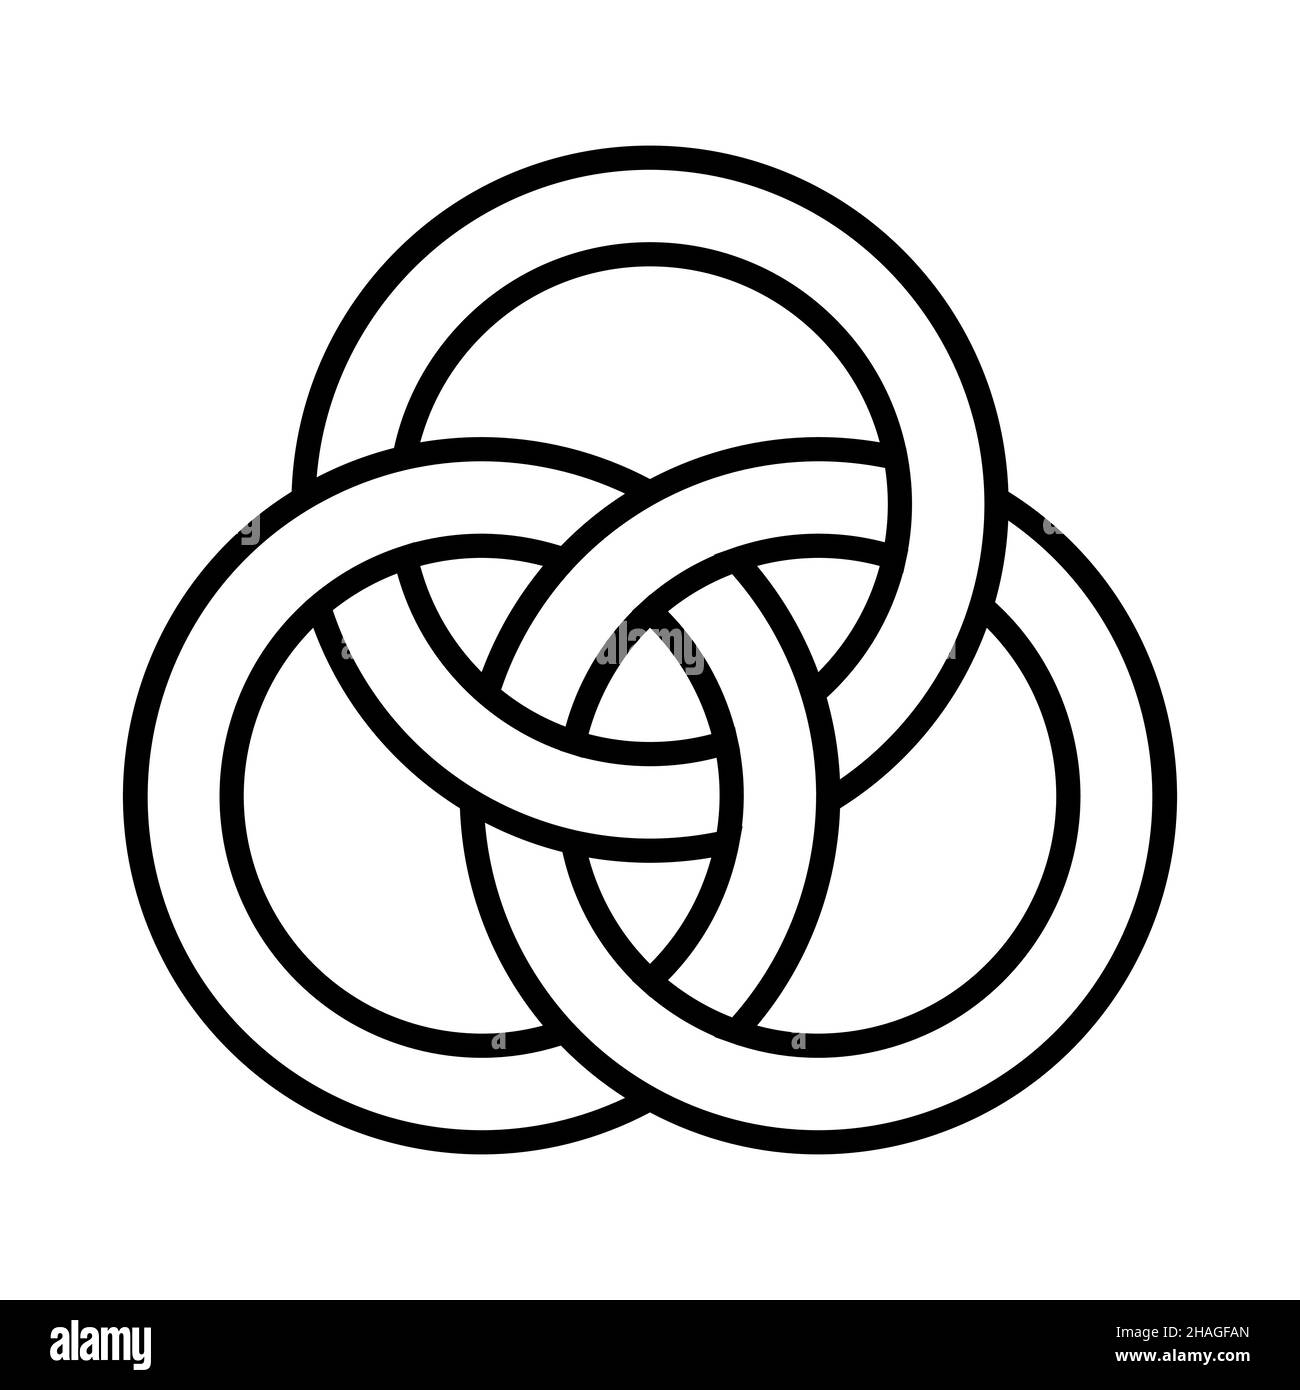 Interconnected circle logo concept, three connected rings vector illustration Stock Vector